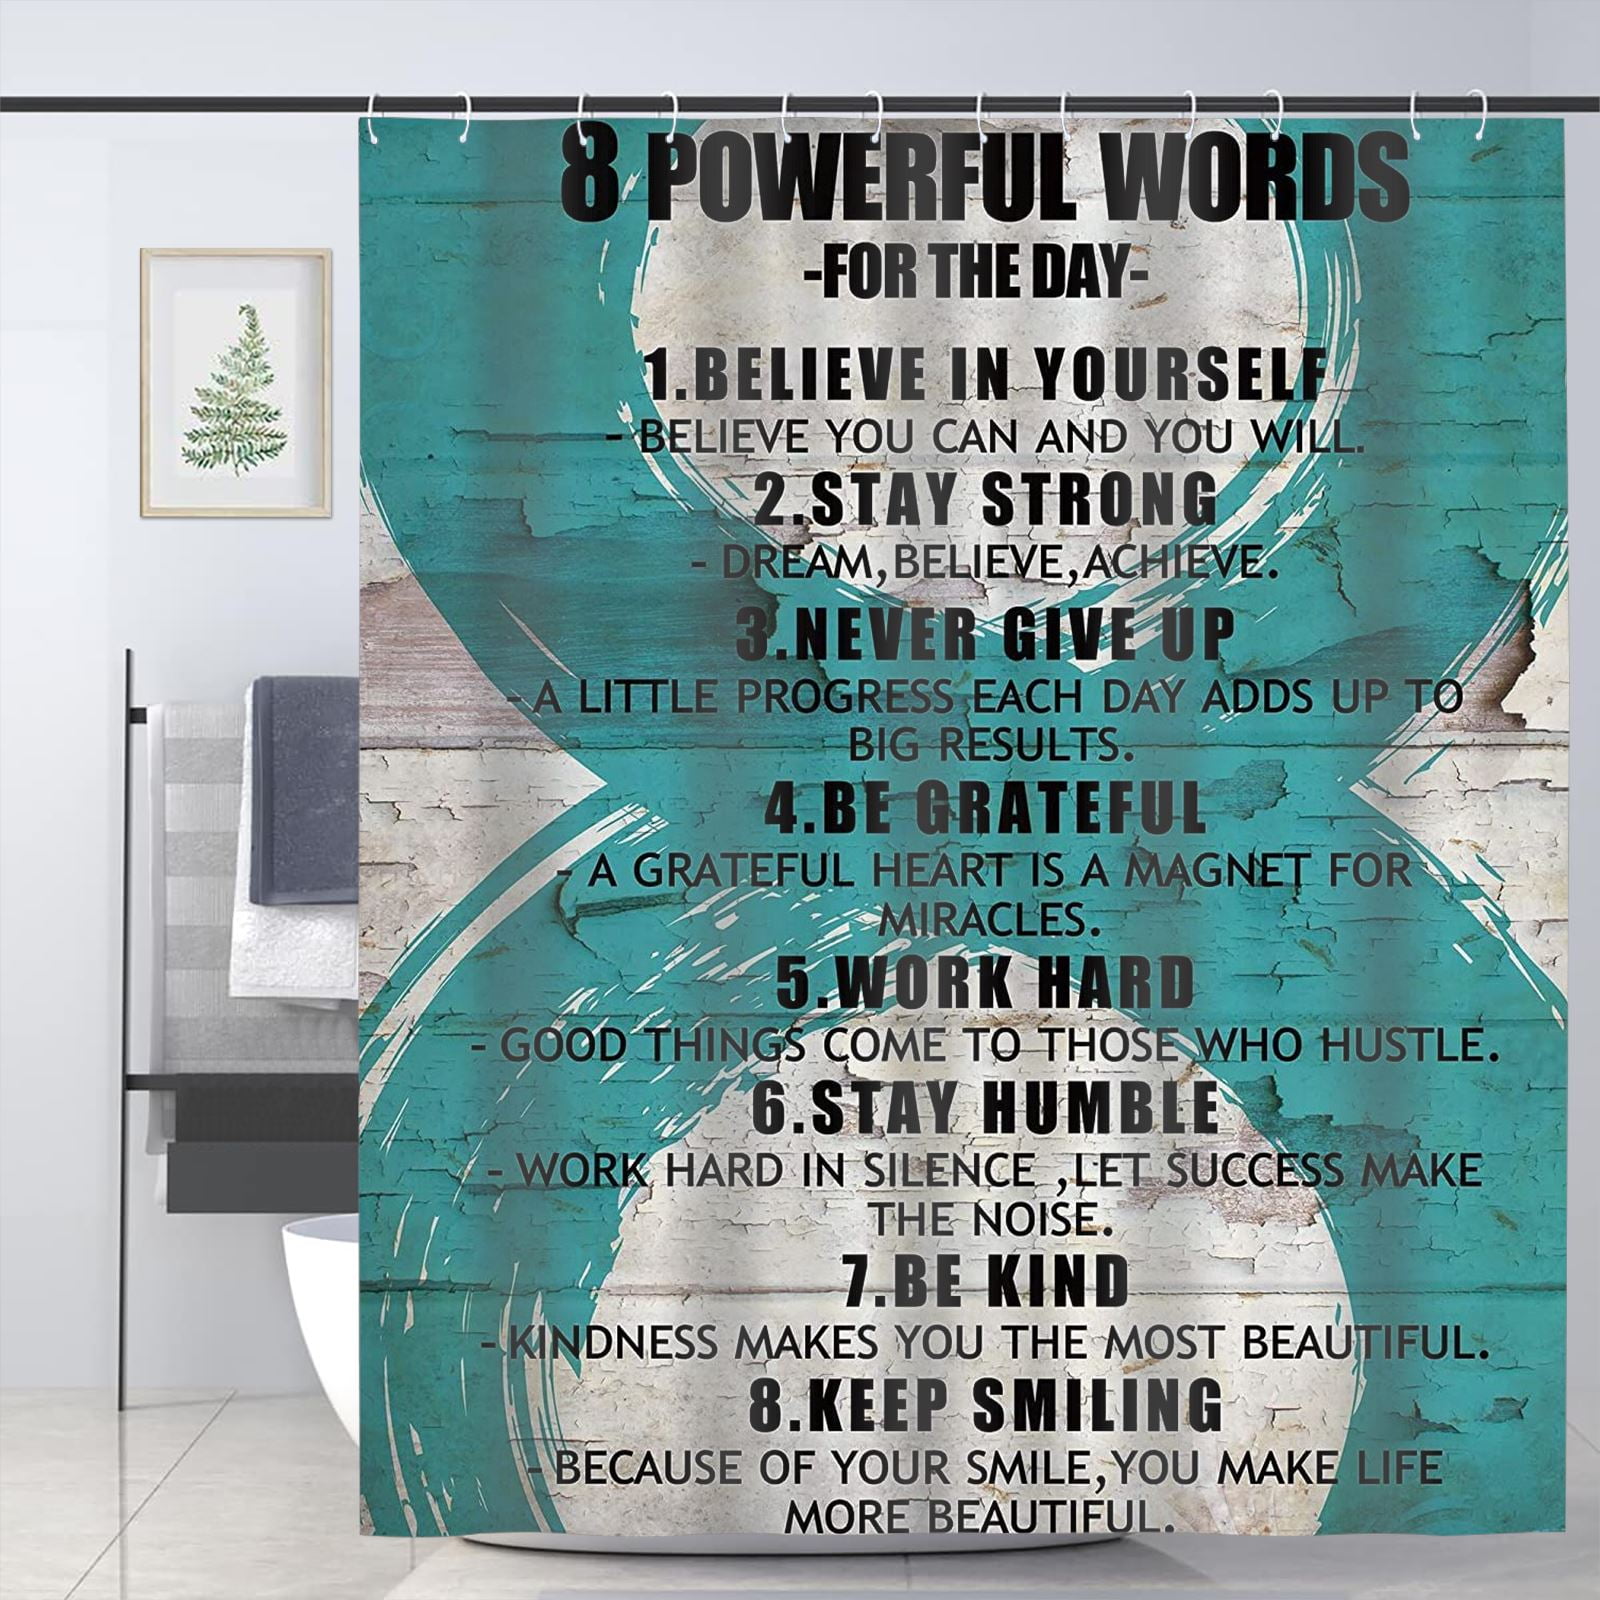 Funny Shower Curtain for Bathroom Accessories Inspirational Funny Quotes Cool Shower Curtain Set 72x72in, Size: 72 x 72, Style 9